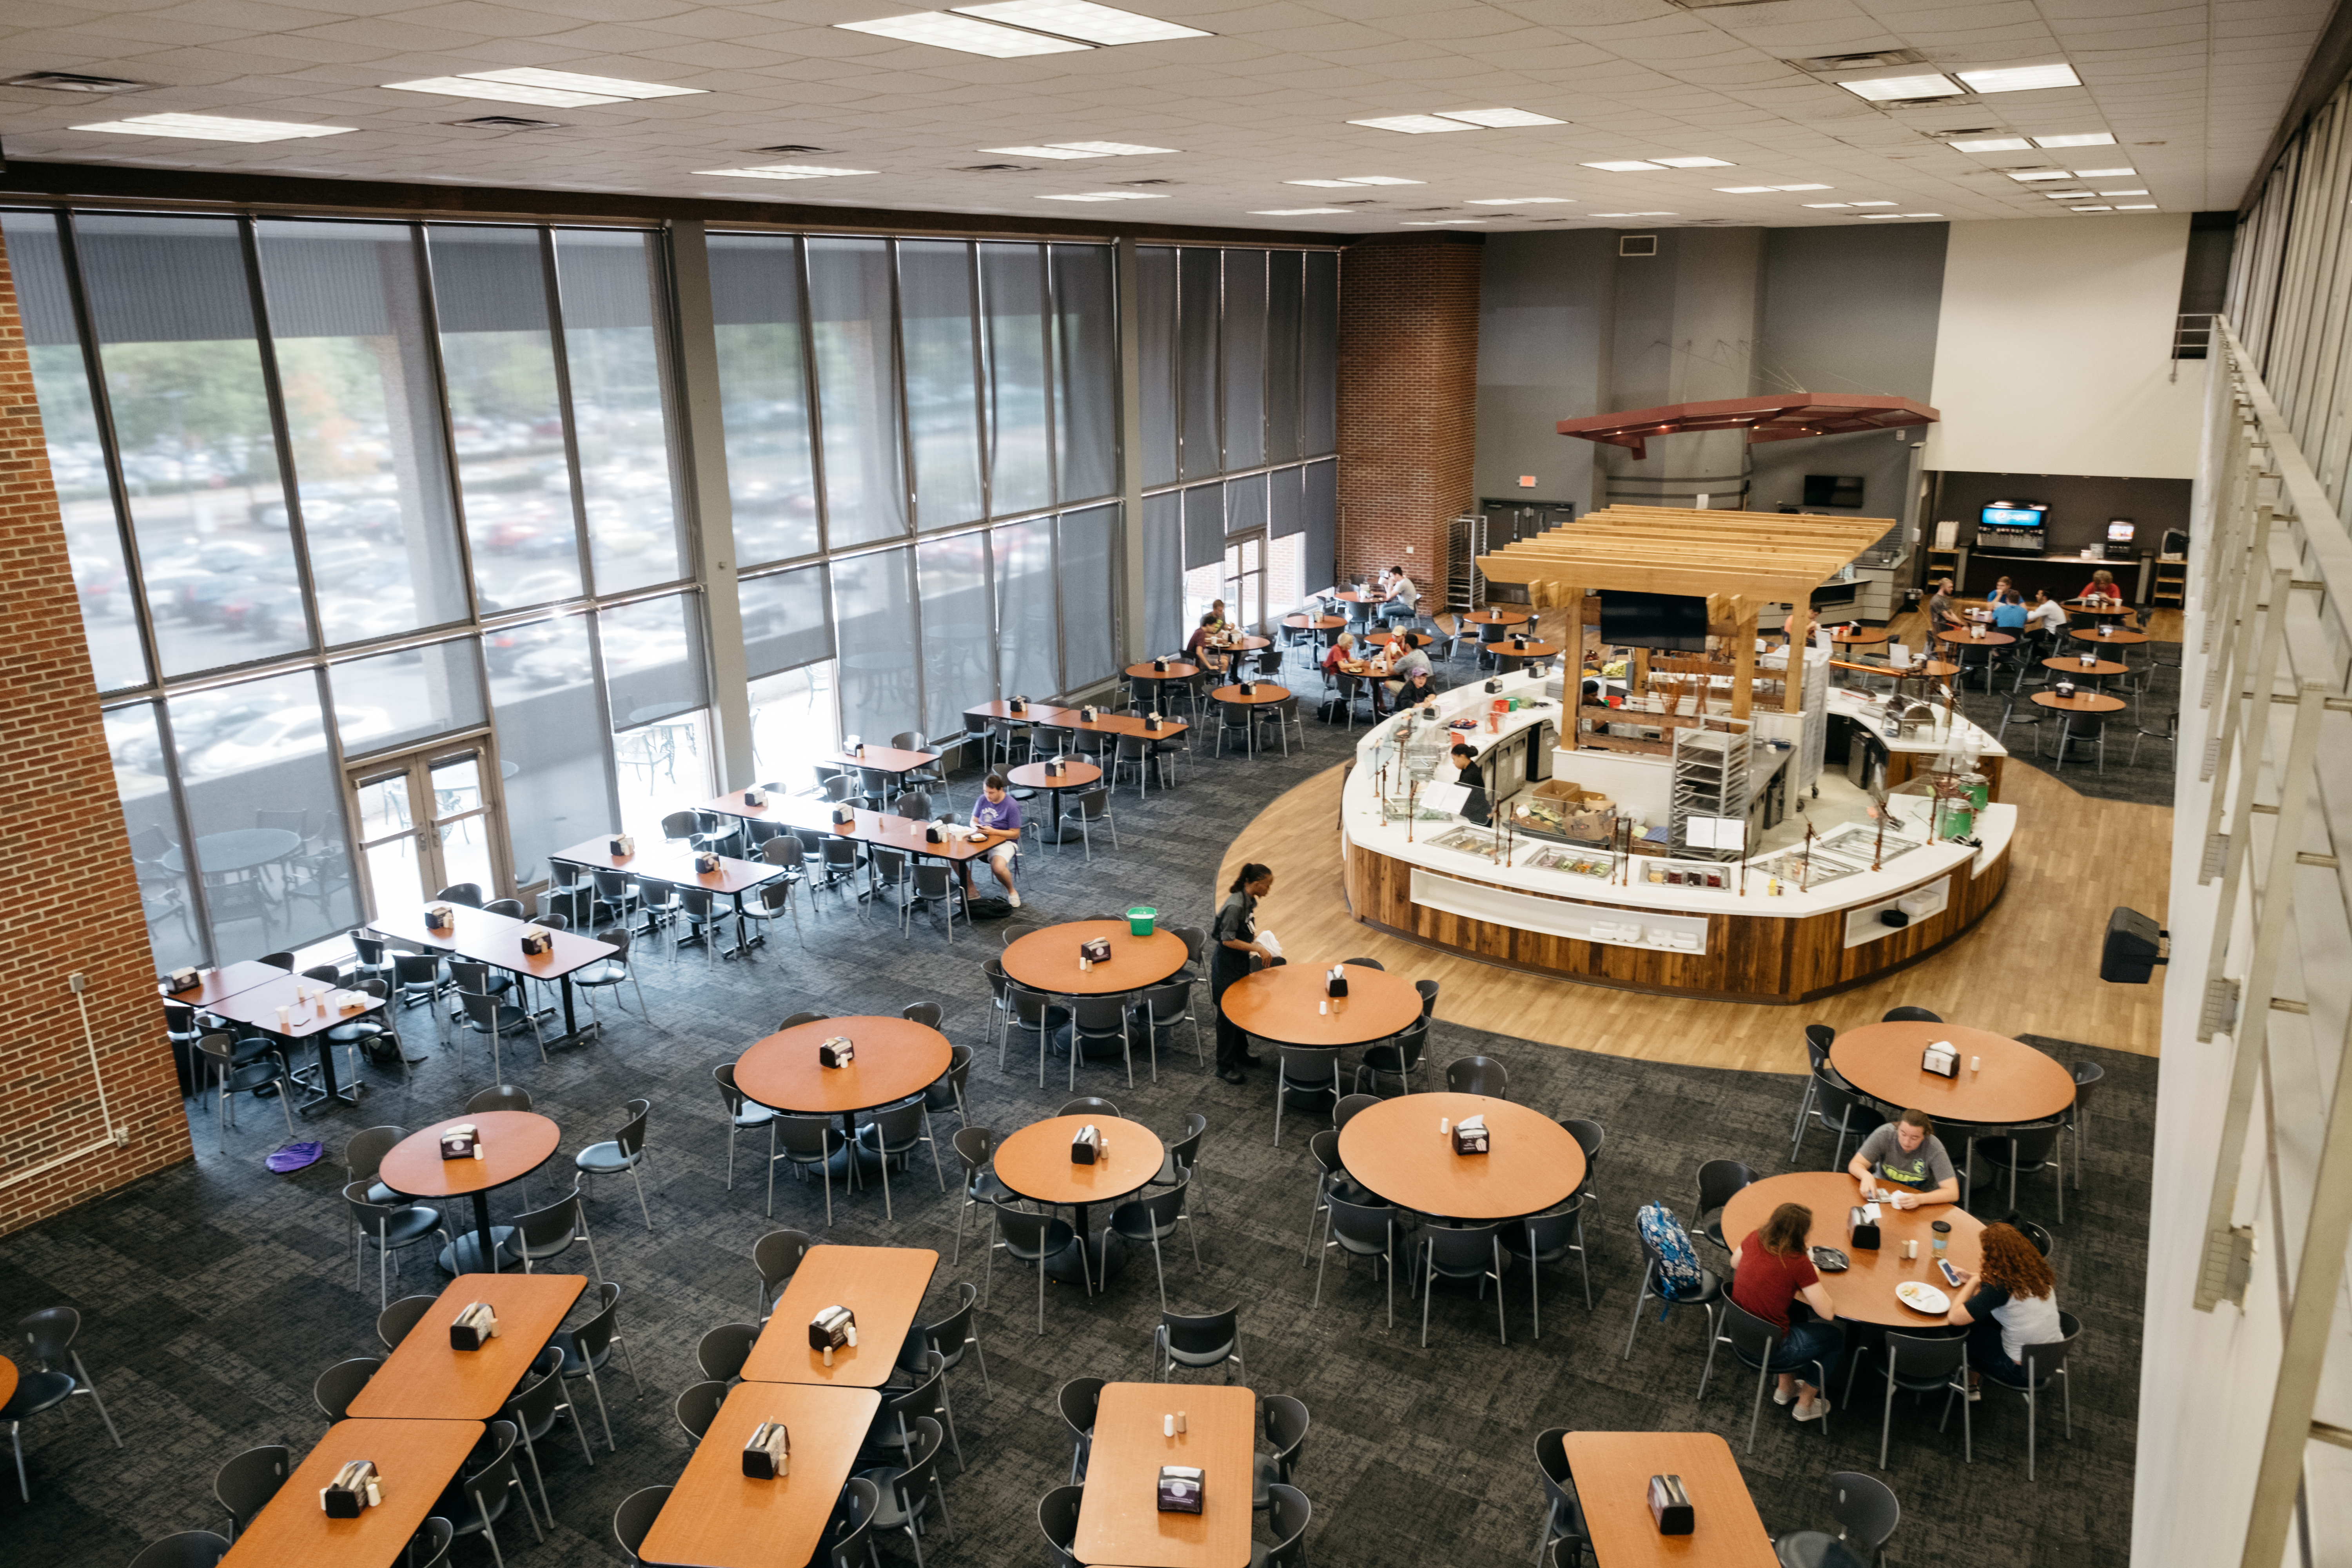 Aladdin brings changes to university dining